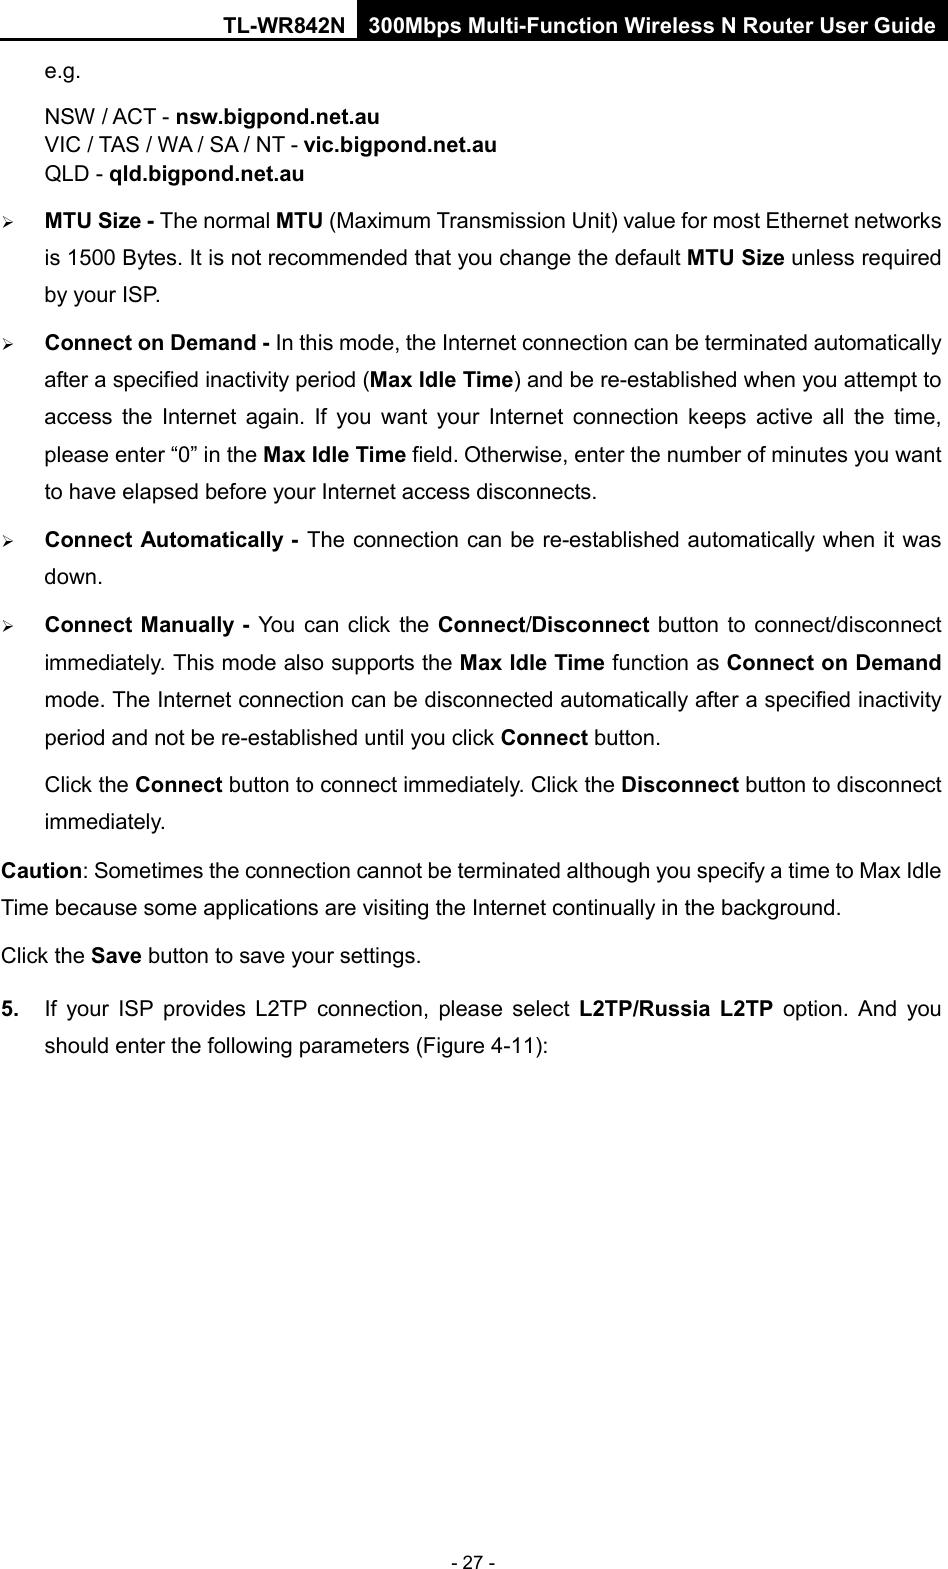 TL-WR842N 300Mbps Multi-Function Wireless N Router User Guide  - 27 - e.g. NSW / ACT - nsw.bigpond.net.au VIC / TAS / WA / SA / NT - vic.bigpond.net.au QLD - qld.bigpond.net.au  MTU Size - The normal MTU (Maximum Transmission Unit) value for most Ethernet networks is 1500 Bytes. It is not recommended that you change the default MTU Size unless required by your ISP.  Connect on Demand - In this mode, the Internet connection can be terminated automatically after a specified inactivity period (Max Idle Time) and be re-established when you attempt to access the Internet again. If you want your Internet connection keeps active all the  time, please enter “0” in the Max Idle Time field. Otherwise, enter the number of minutes you want to have elapsed before your Internet access disconnects.  Connect Automatically - The connection can be re-established automatically when it was down.  Connect Manually - You can click the Connect/Disconnect button to connect/disconnect immediately. This mode also supports the Max Idle Time function as Connect on Demand mode. The Internet connection can be disconnected automatically after a specified inactivity period and not be re-established until you click Connect button.   Click the Connect button to connect immediately. Click the Disconnect button to disconnect immediately. Caution: Sometimes the connection cannot be terminated although you specify a time to Max Idle Time because some applications are visiting the Internet continually in the background. Click the Save button to save your settings. 5. If your ISP provides L2TP connection, please select L2TP/Russia L2TP option.  And  you should enter the following parameters (Figure 4-11): 